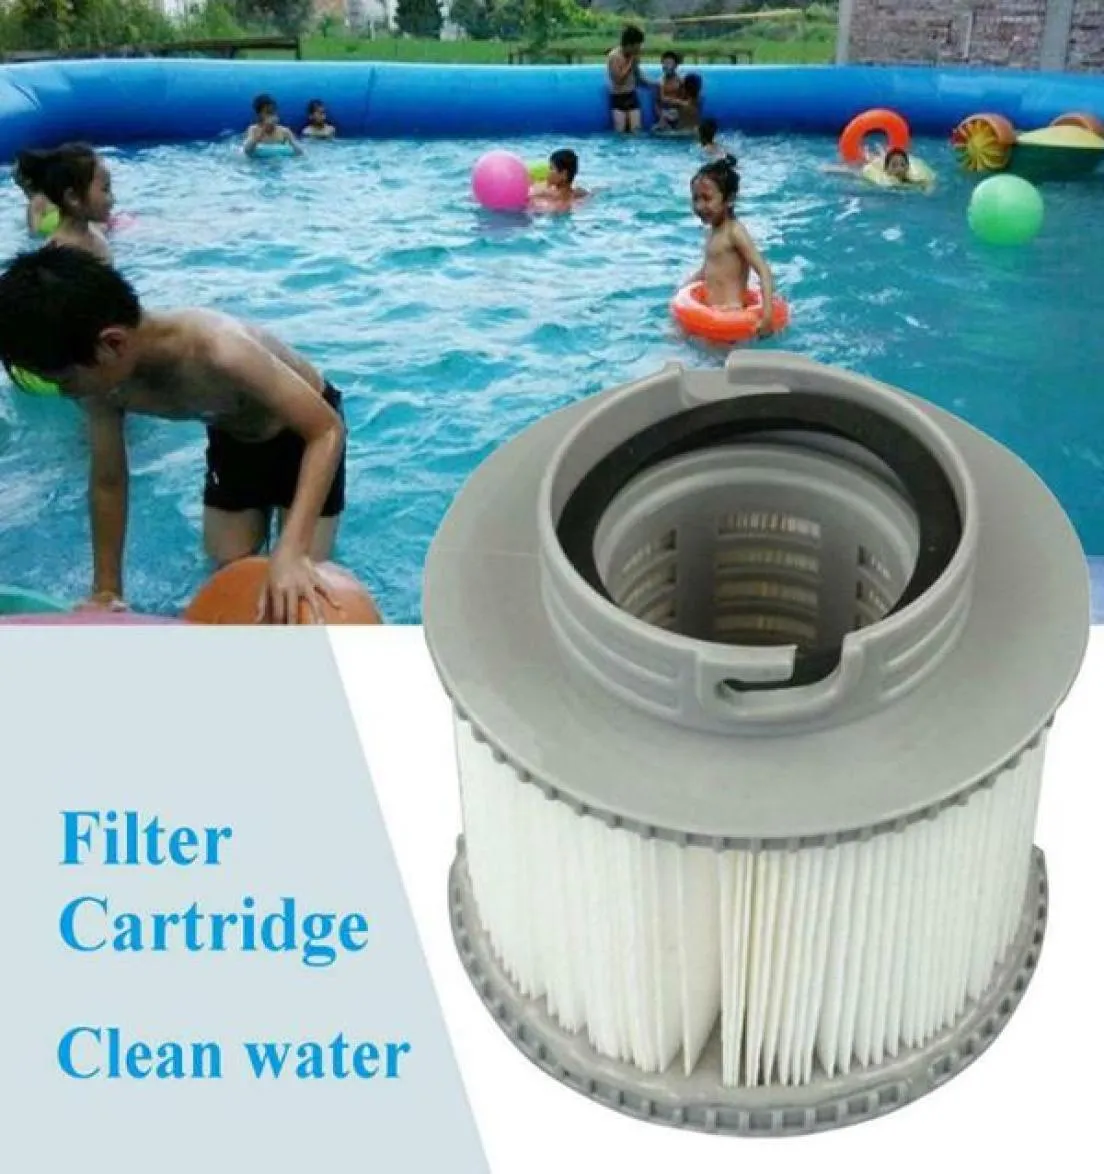 Newly 12 Pcs Filter Cartridges Strainer Replacement Durable for MSPA Tub Spas Swimming Pool8960458